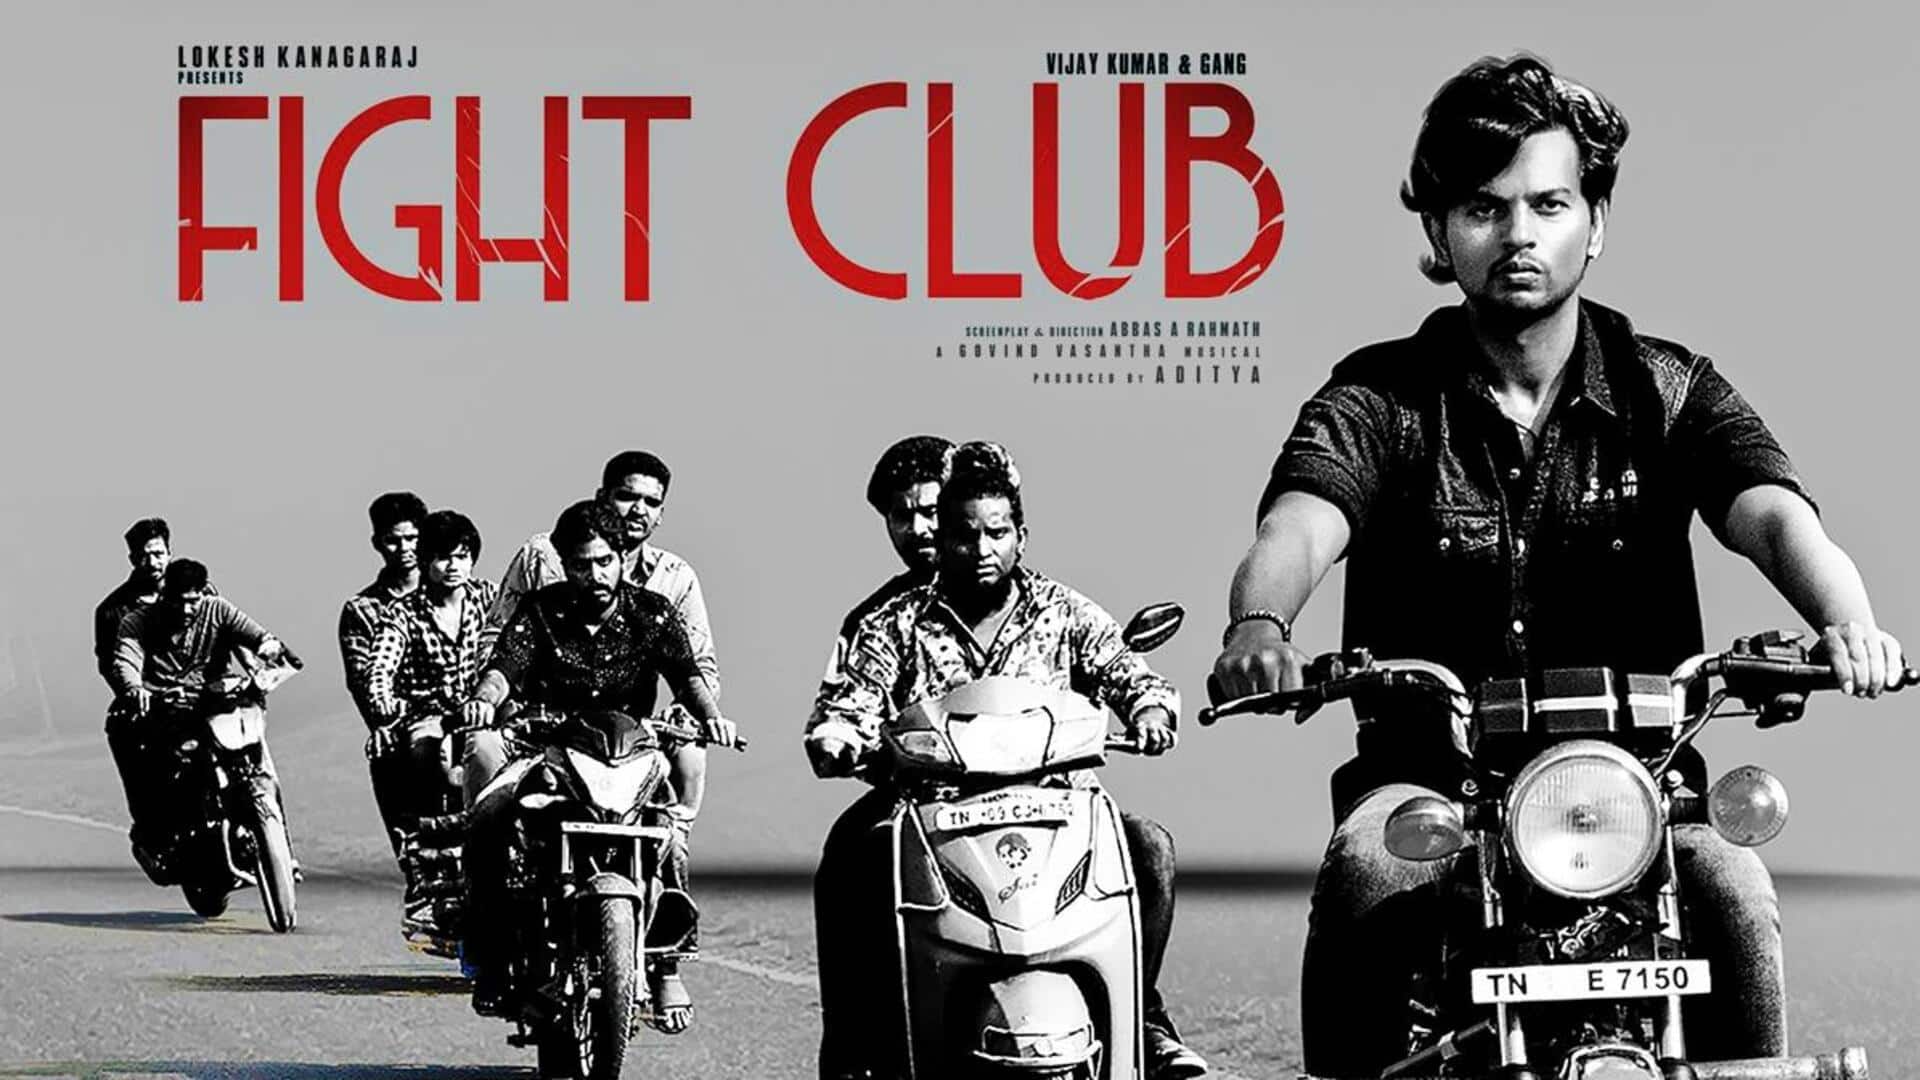 Box office collection: 'Fight Club' fizzles out amid negative buzz